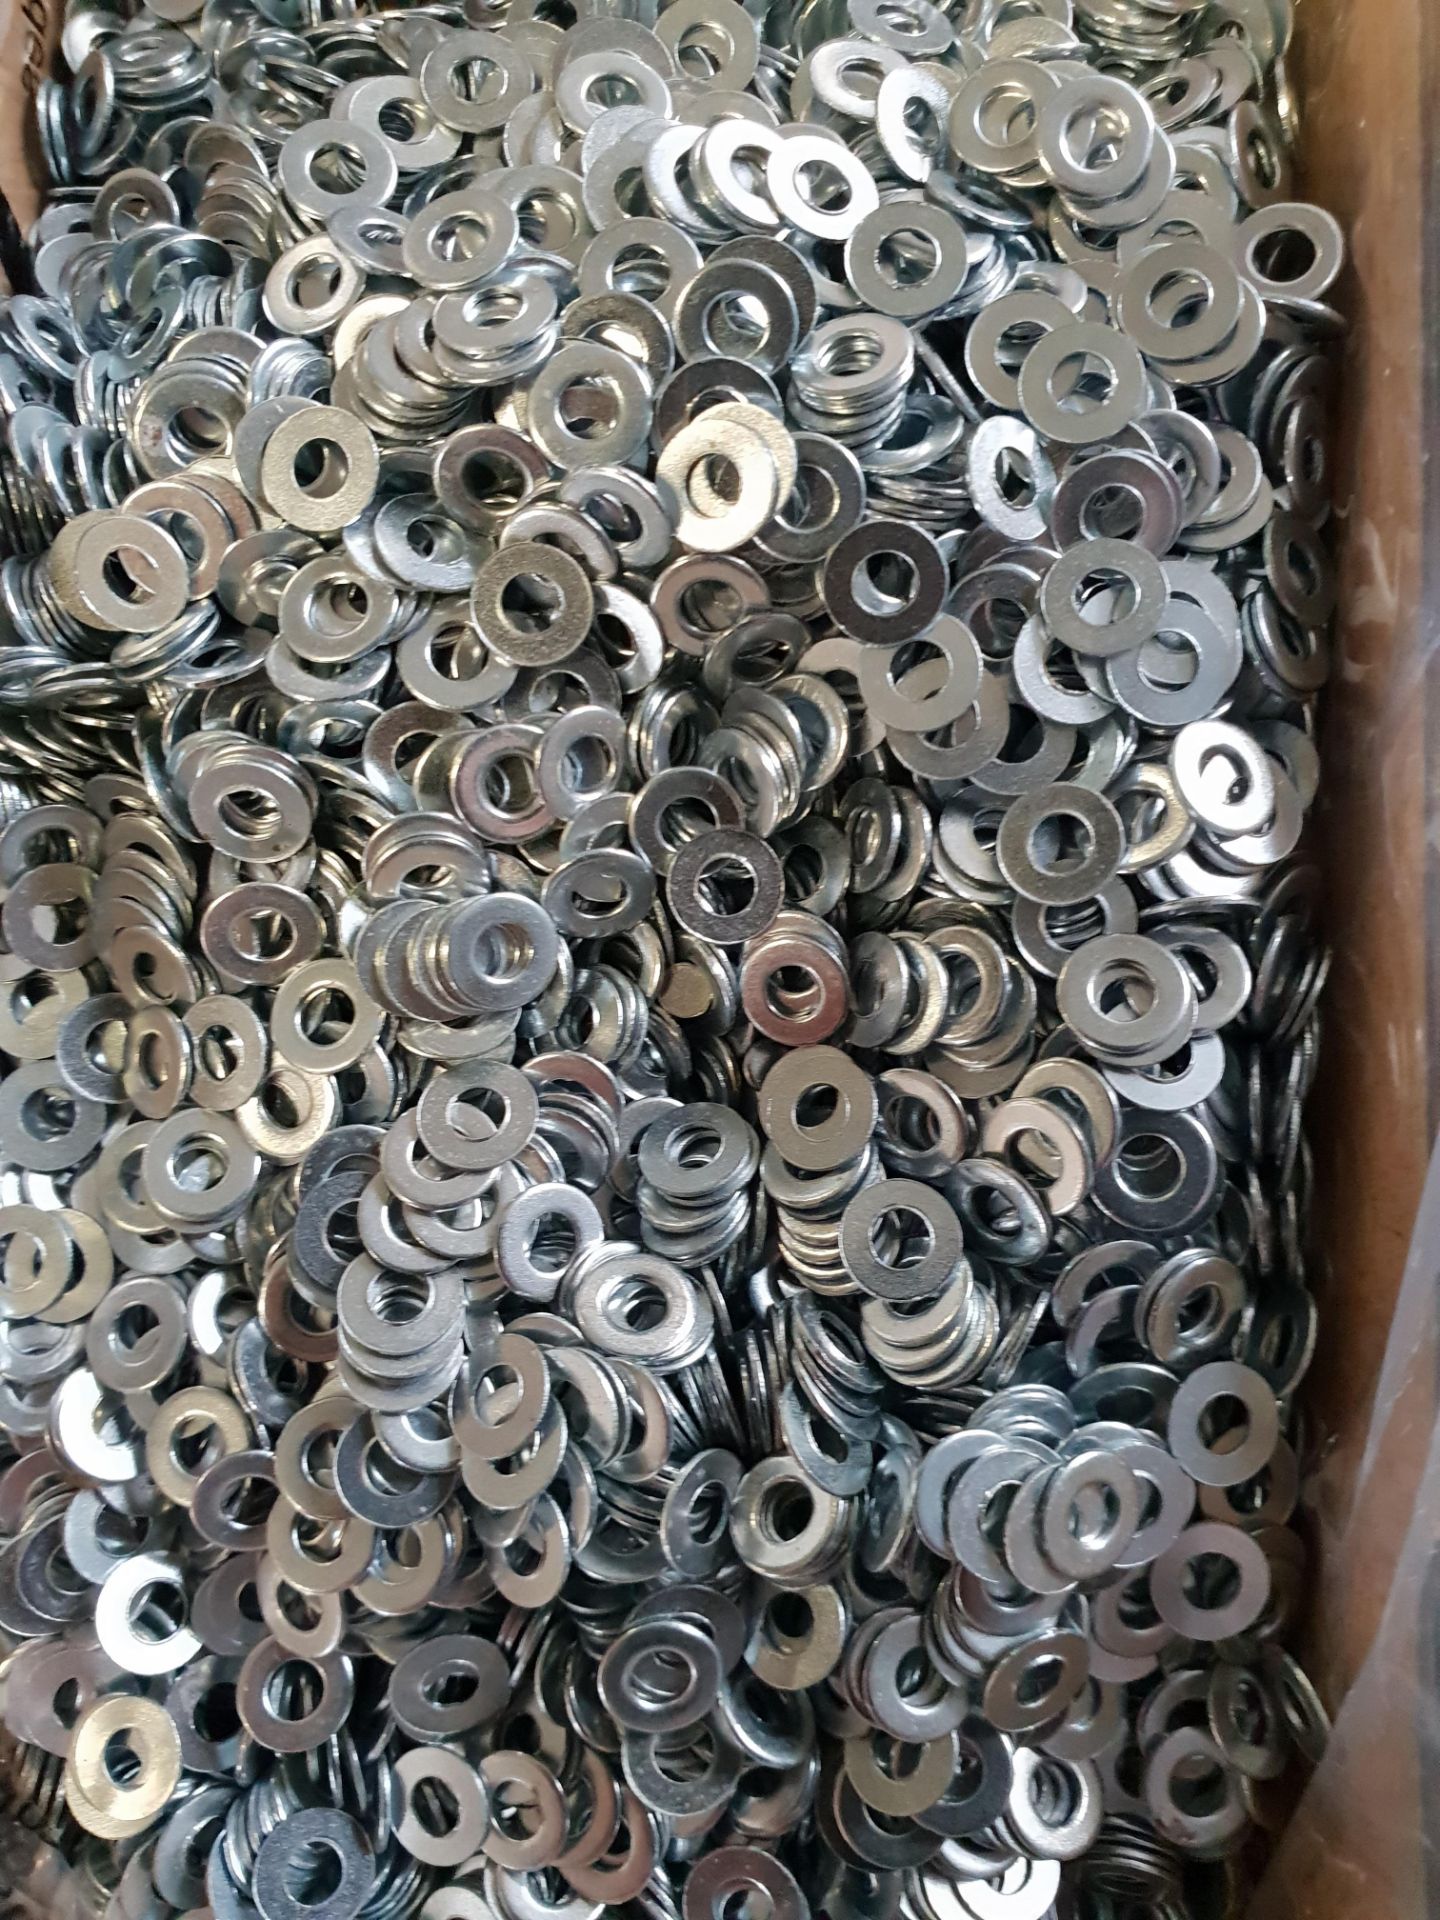 8kg - M3x7mm Washers